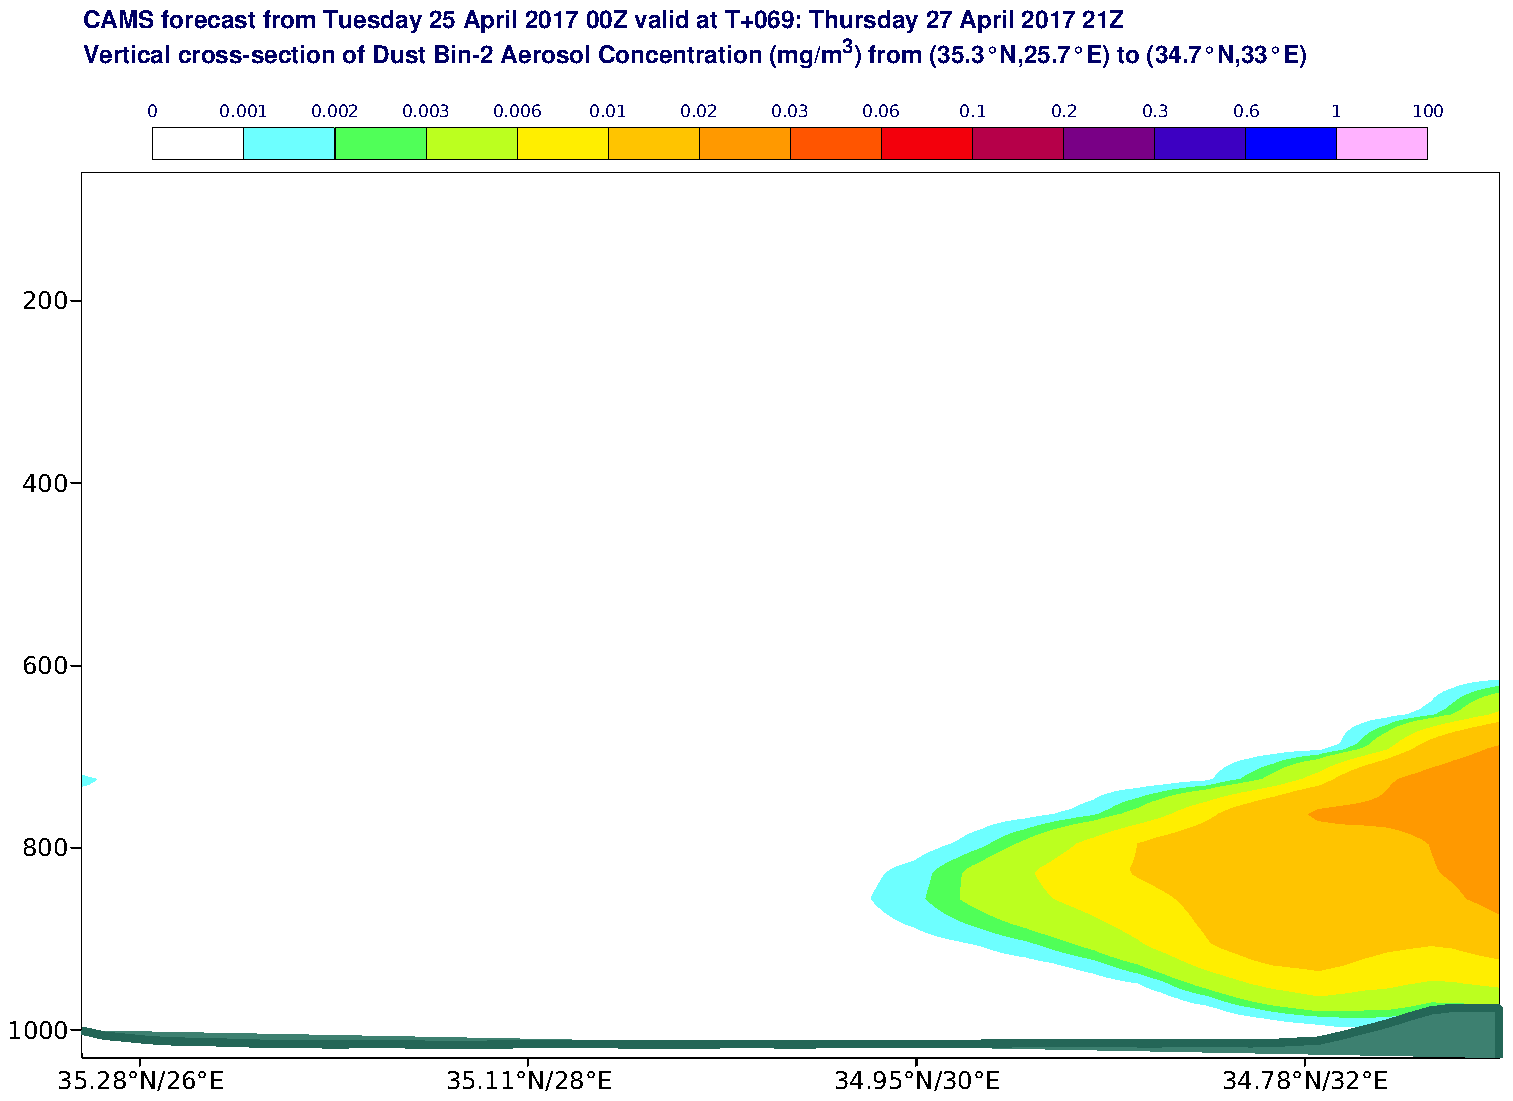 Vertical cross-section of Dust Bin-2 Aerosol Concentration (mg/m3) valid at T69 - 2017-04-27 21:00